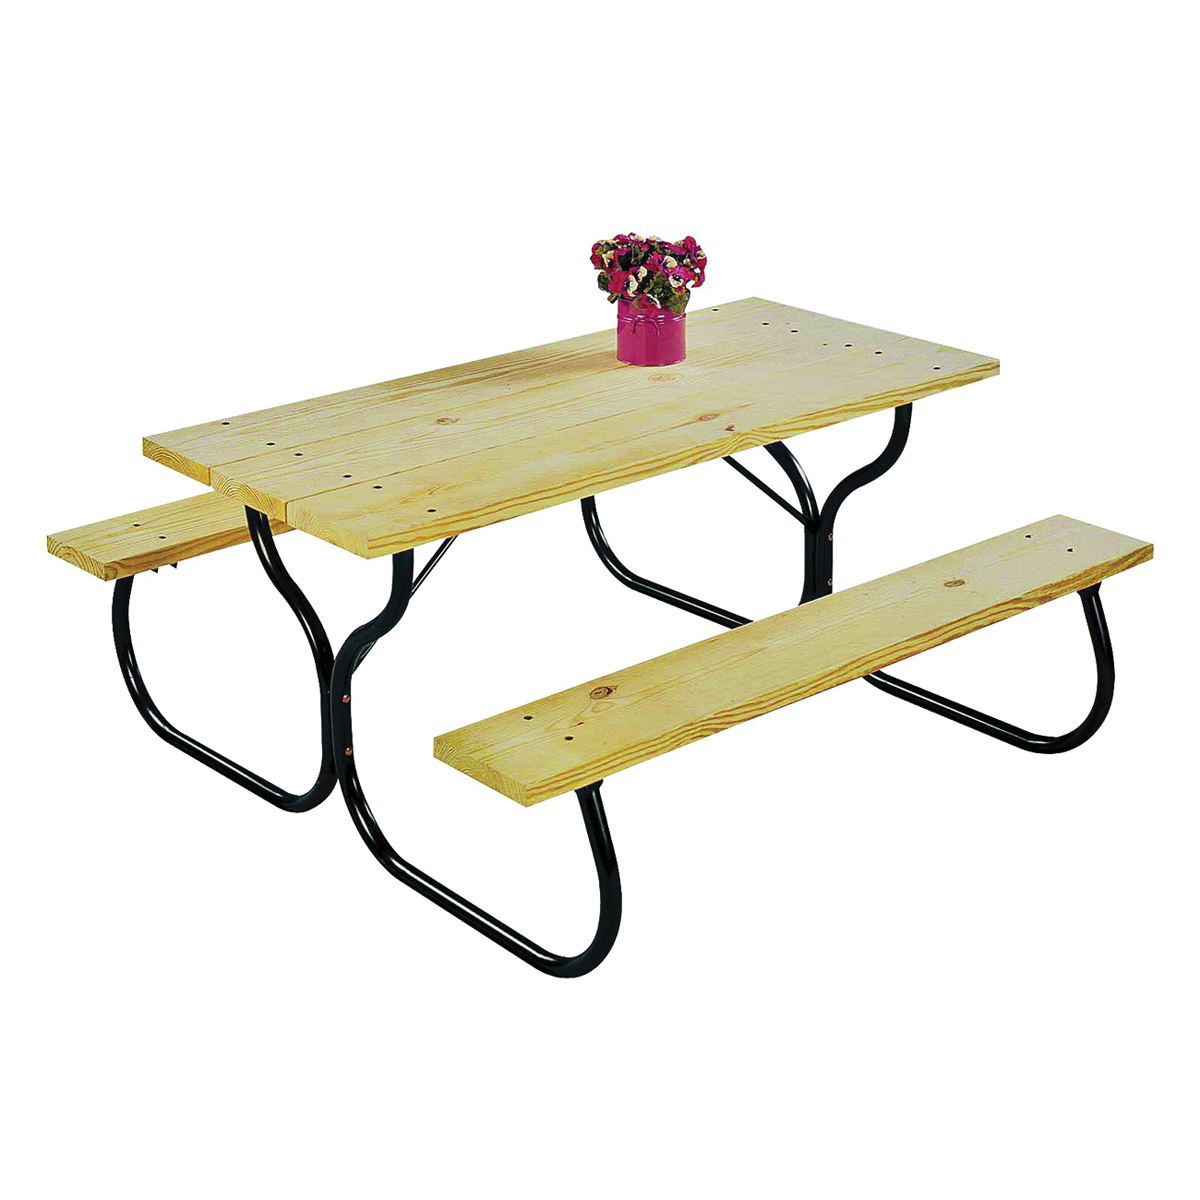 FC-30 Table Frame Kit, Heavy-Duty, Steel, Black, Powder Coated Steel, For: Outdoor Seating